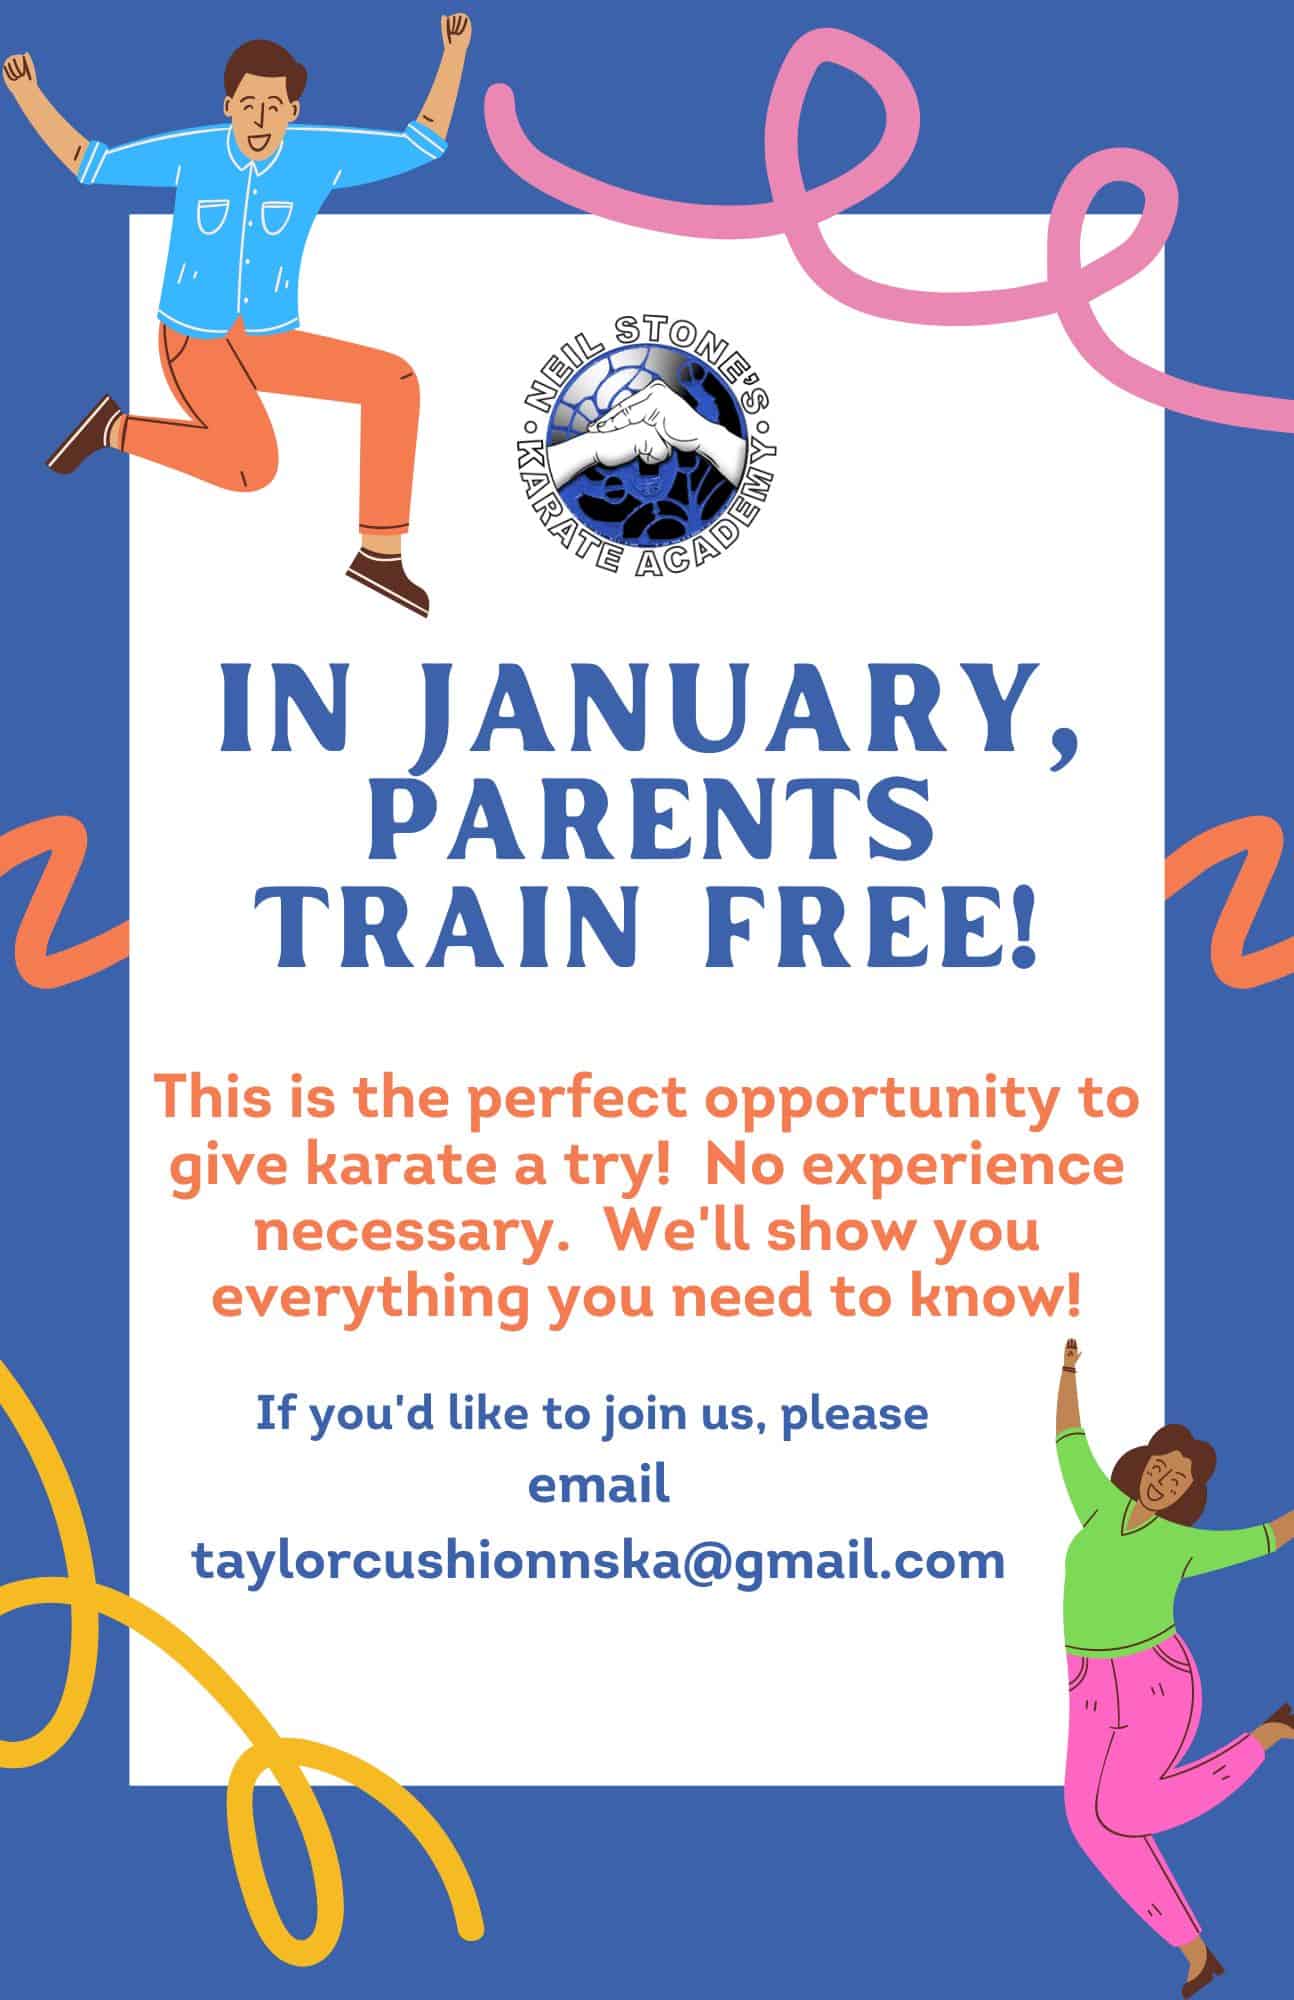 Neil Stone's Karate Academy In January, Parents Train for FREE! 